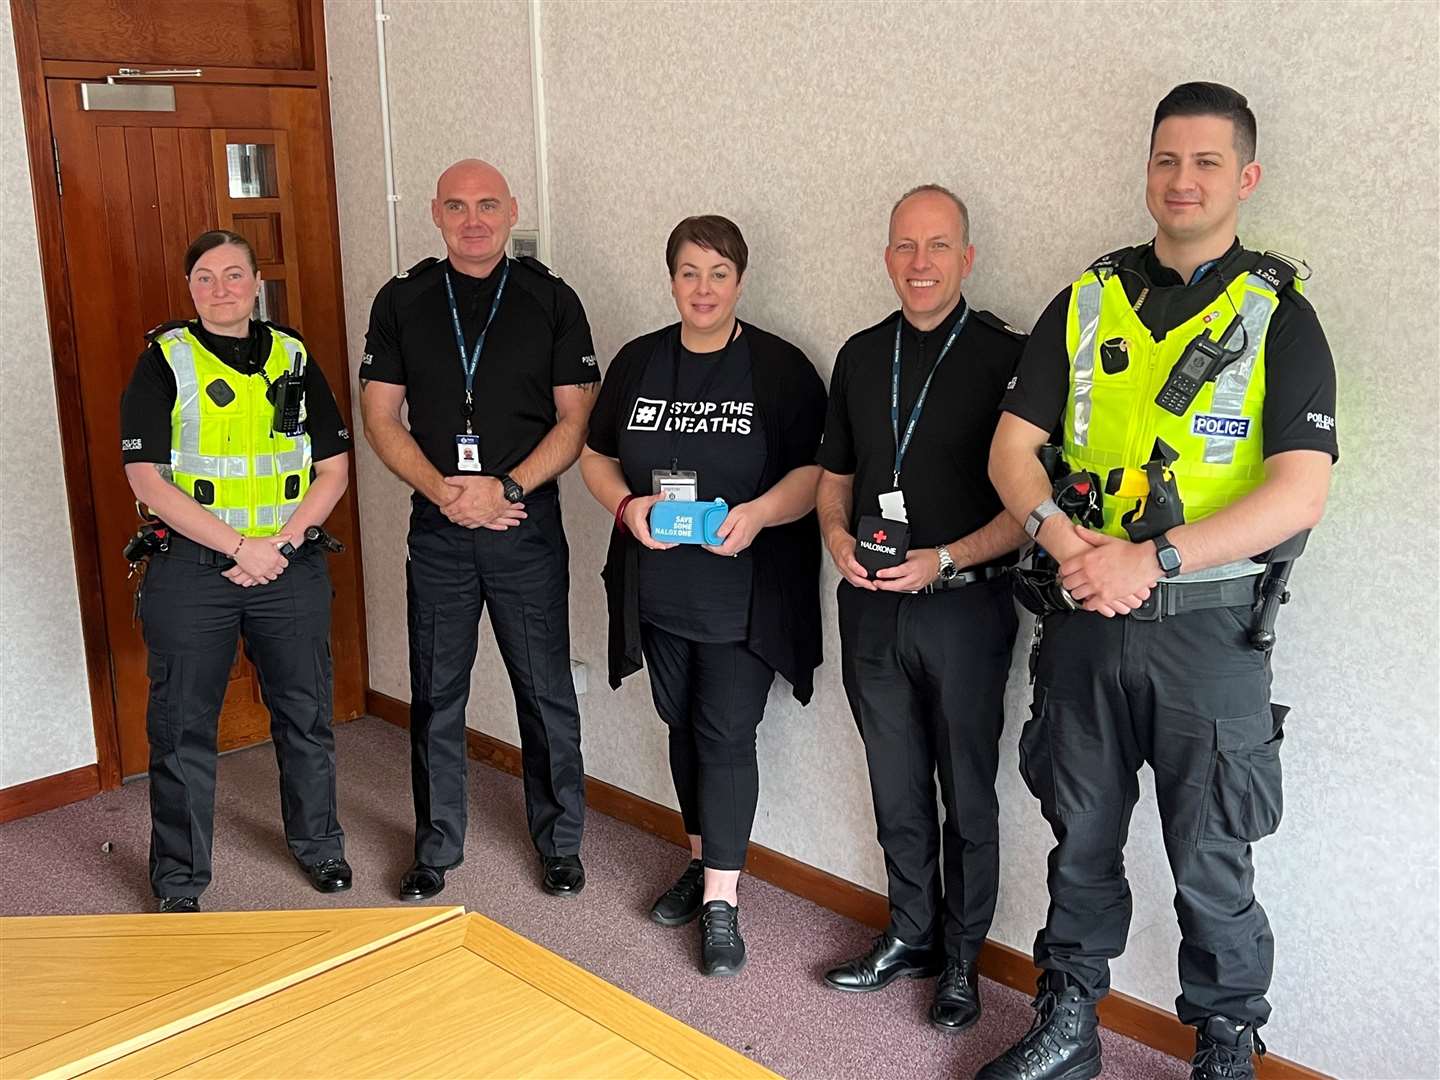 PC Jenna Minshull, Greater Glasgow Division,Superintendent Pat Murphy, Greater Glasgow Division,Elena Whitham, Minister for Drugs and Alcohol Policy,Assistant Chief Constable Gary Ritchie,PC Scott Lisett, Greater Glasgow Division. Picture: Police Scotland.